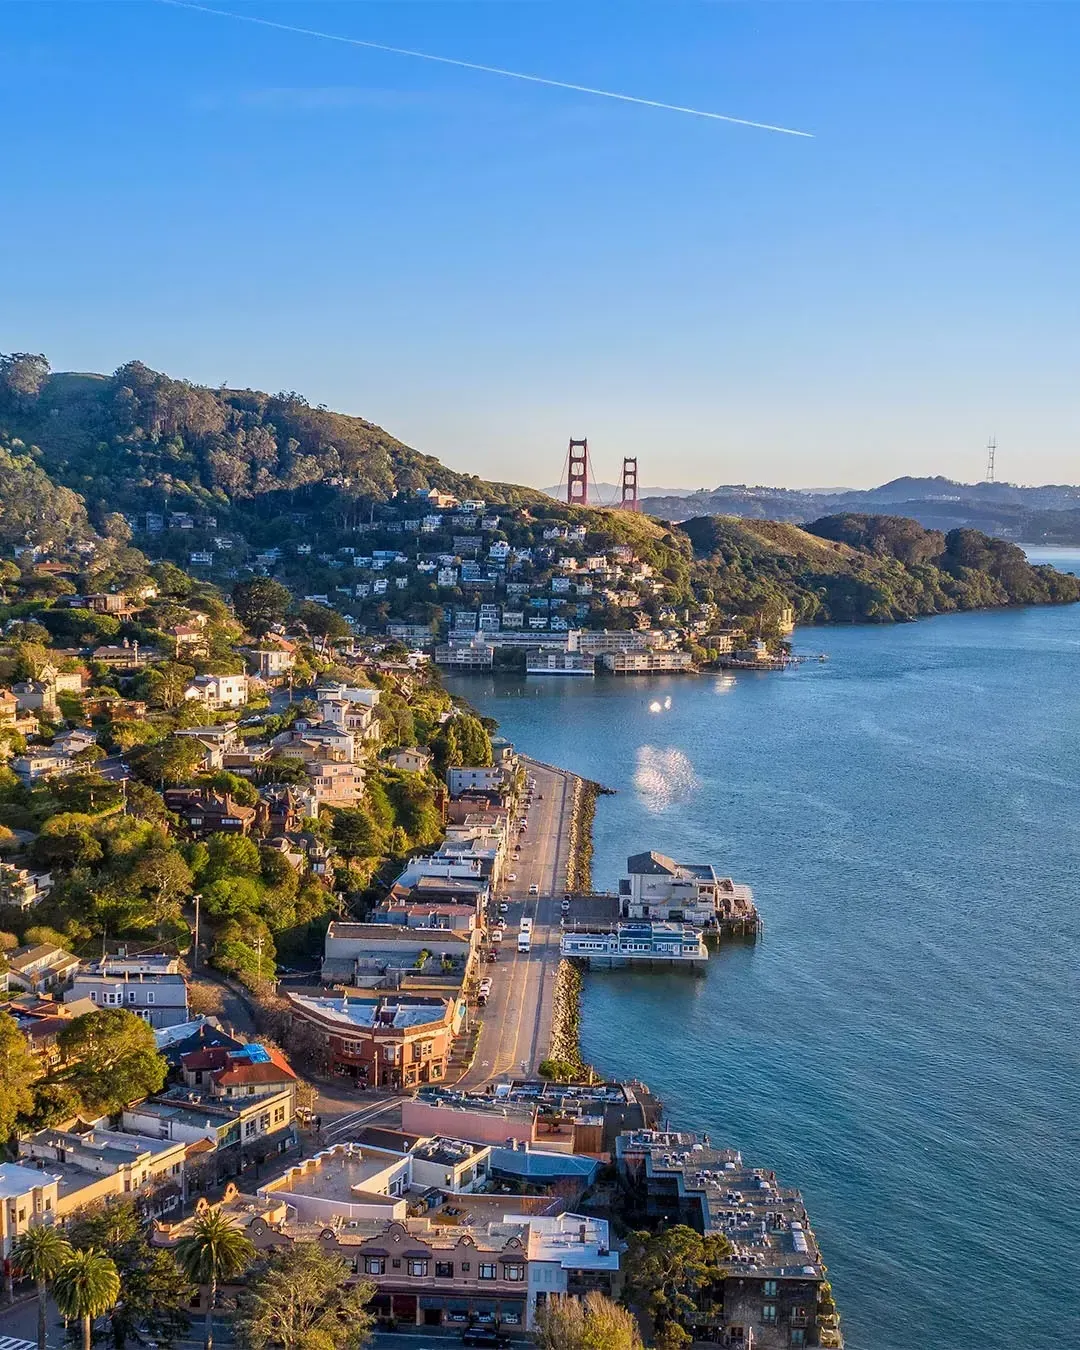 A bird's-eye view of Sausalito's waterfront.